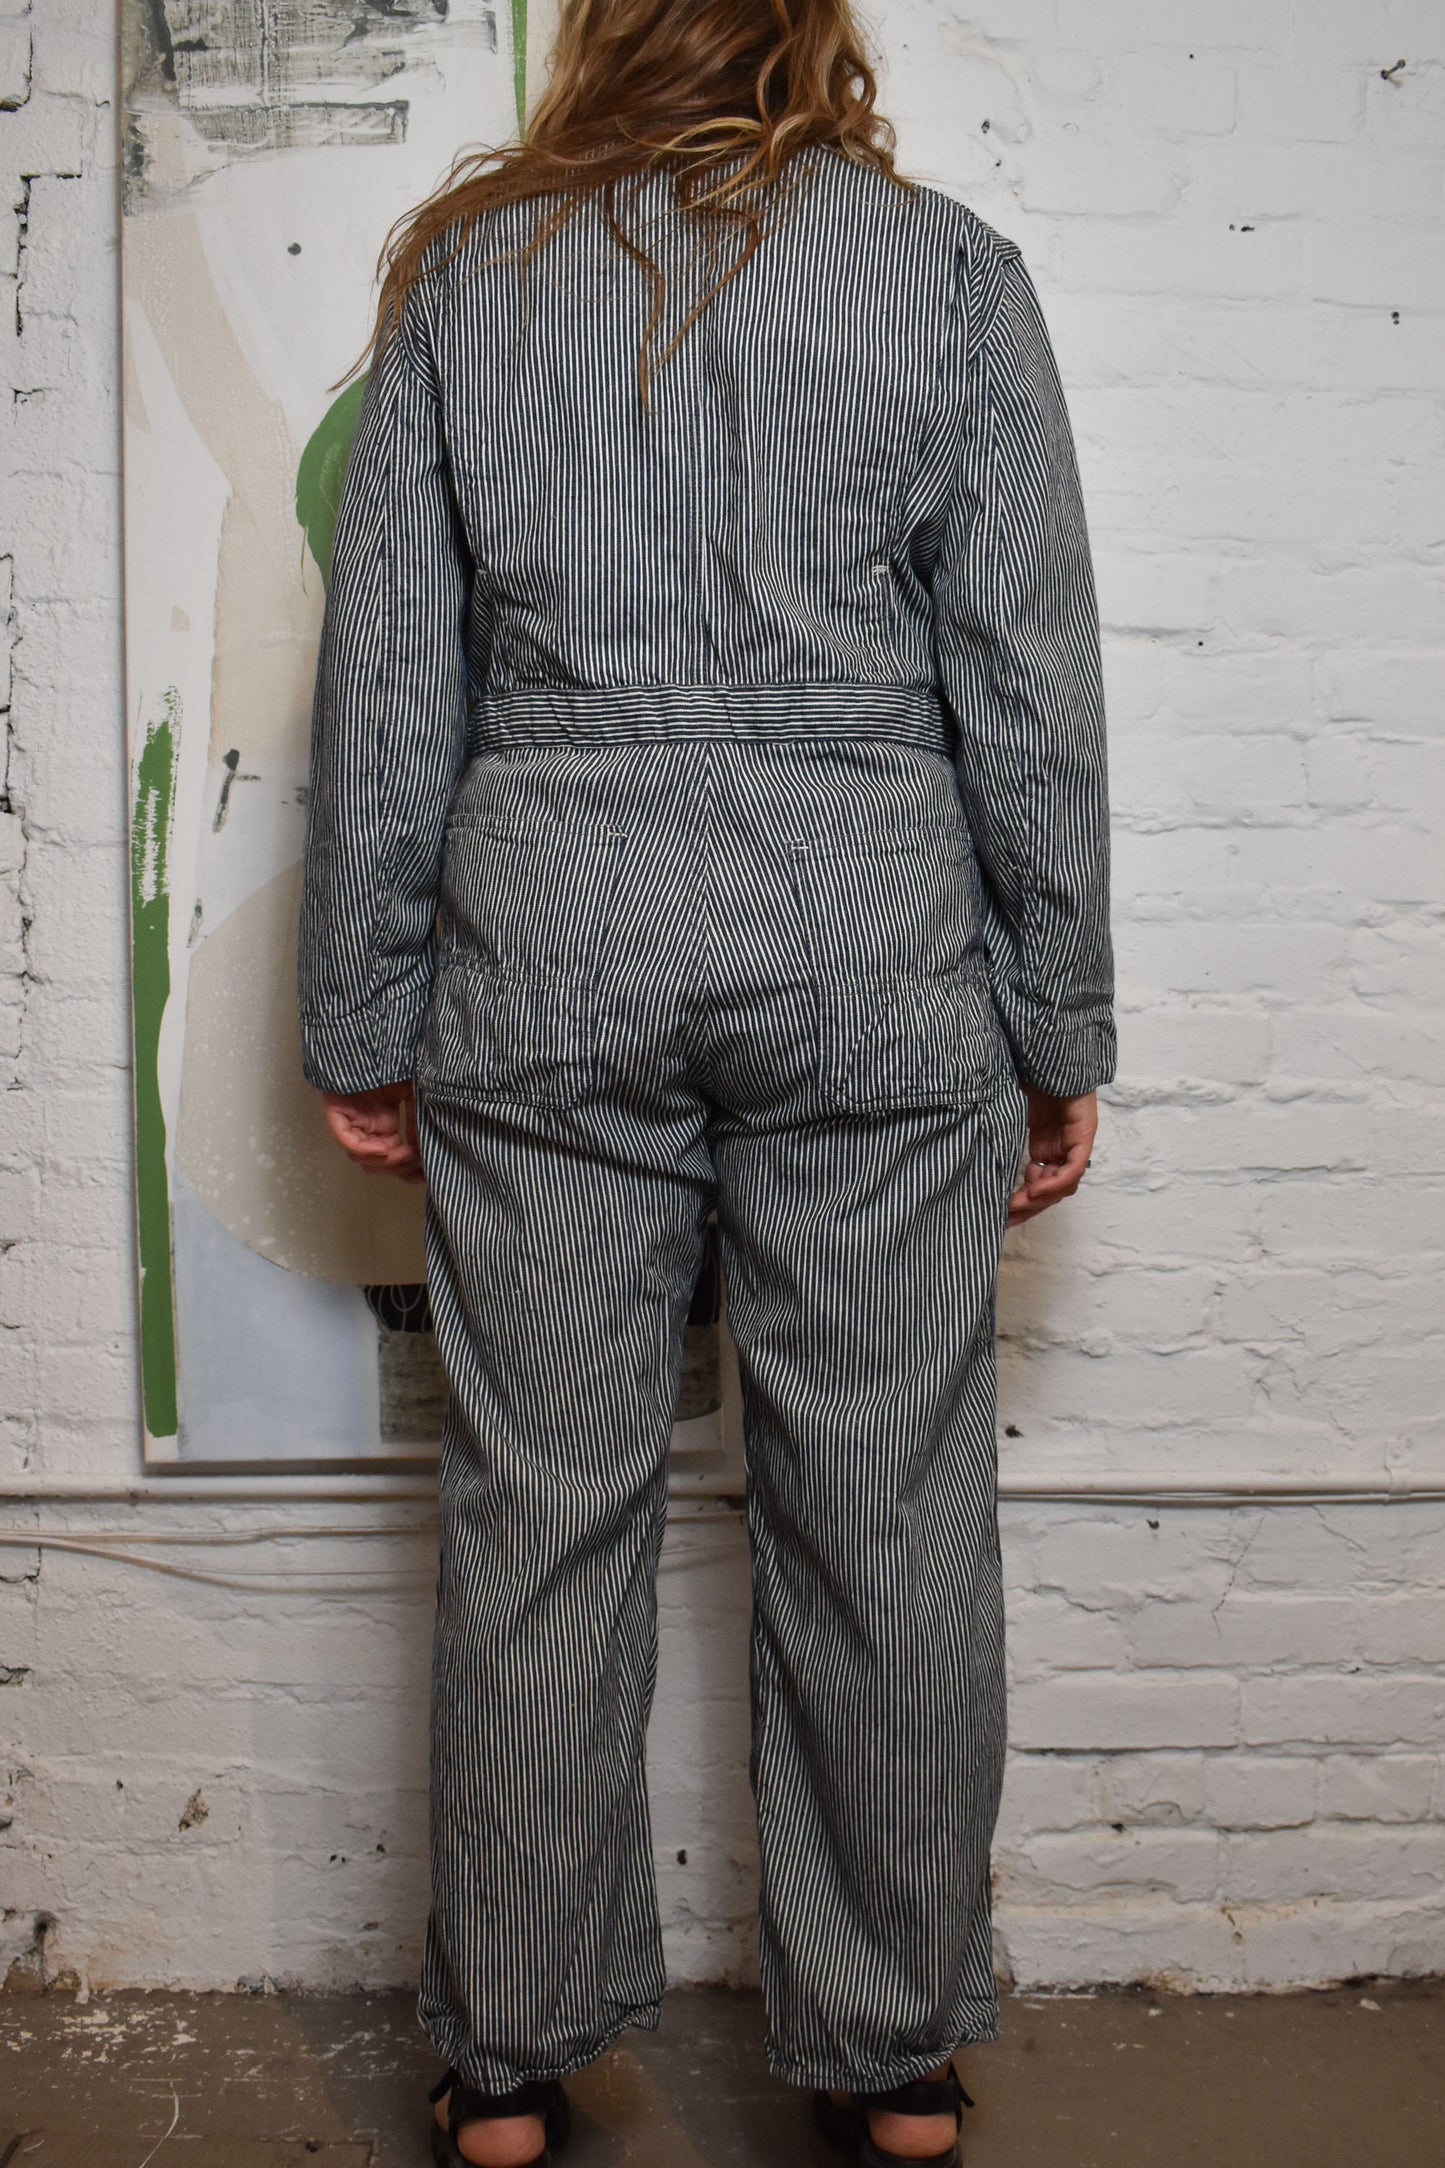 Vintage 1950s/60s Hickory Striped Hercules Coveralls "Nation - Alls"